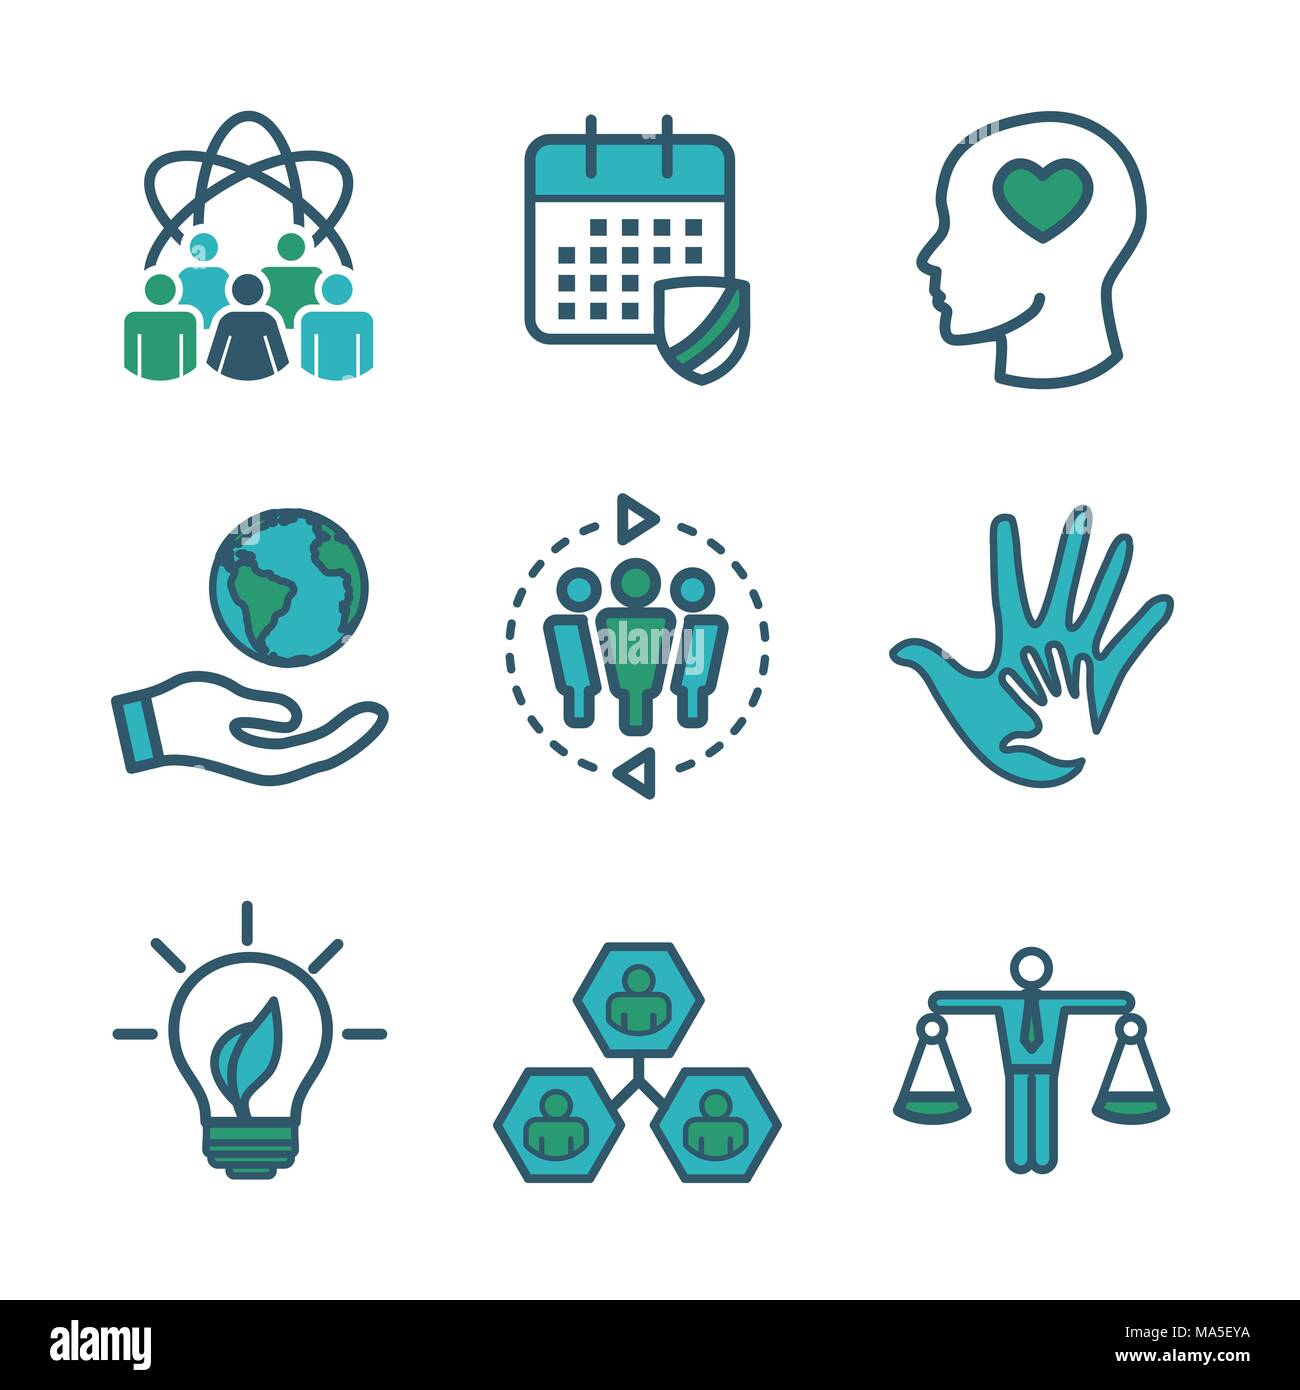 Social Responsibility Outline Icon Set with Honesty, integrity, & collaboration, etc Stock Vector